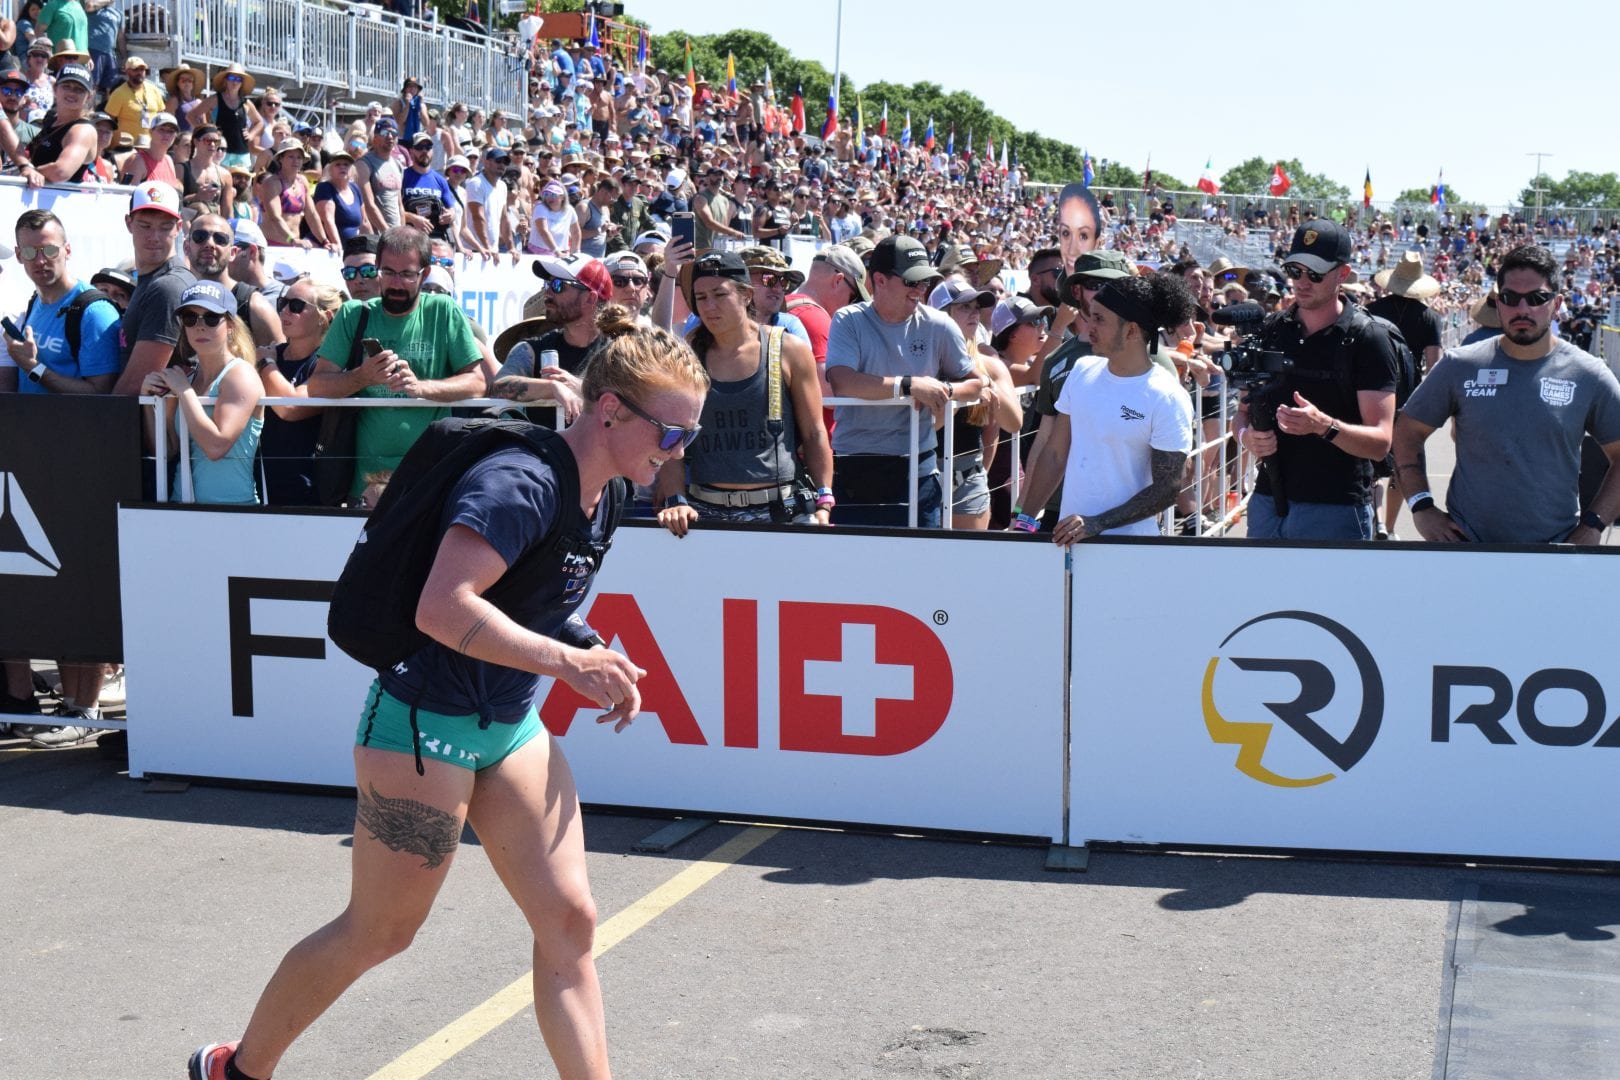 Eik Gylfadottir competes in the Ruck Run event at the 2019 CrossFit Games.